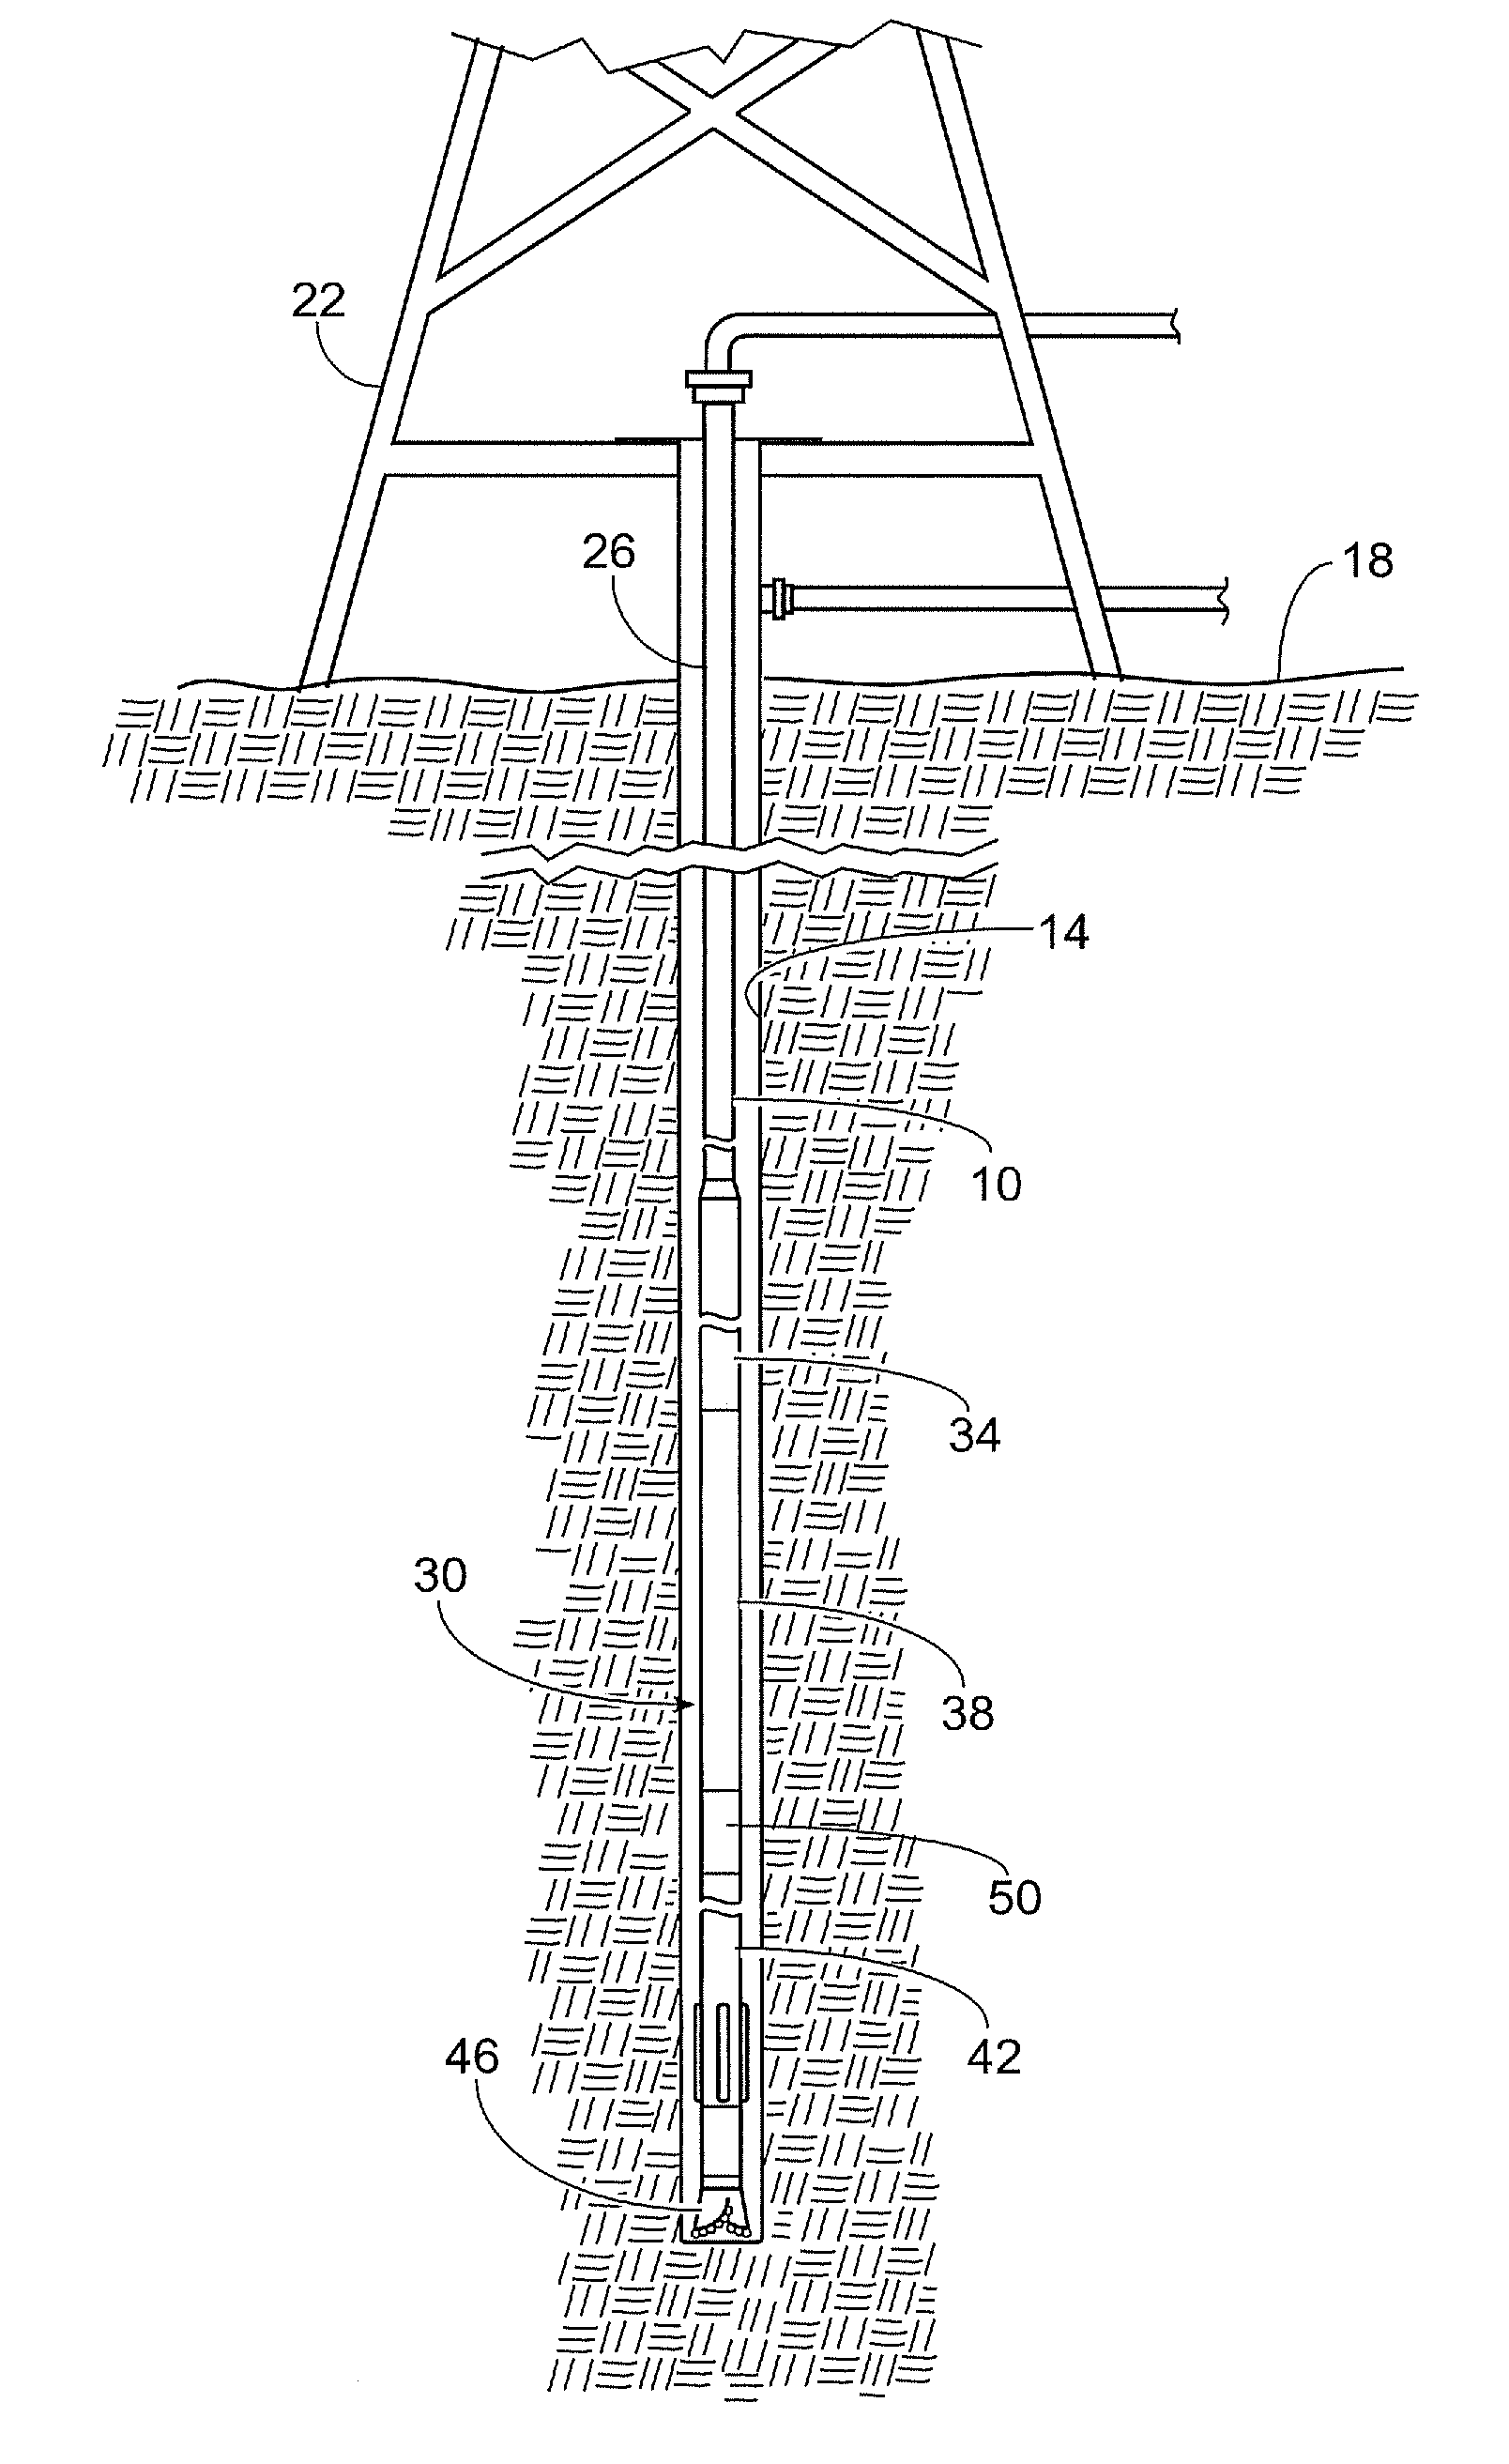 Downhole shock absorber for torsional and axial loads